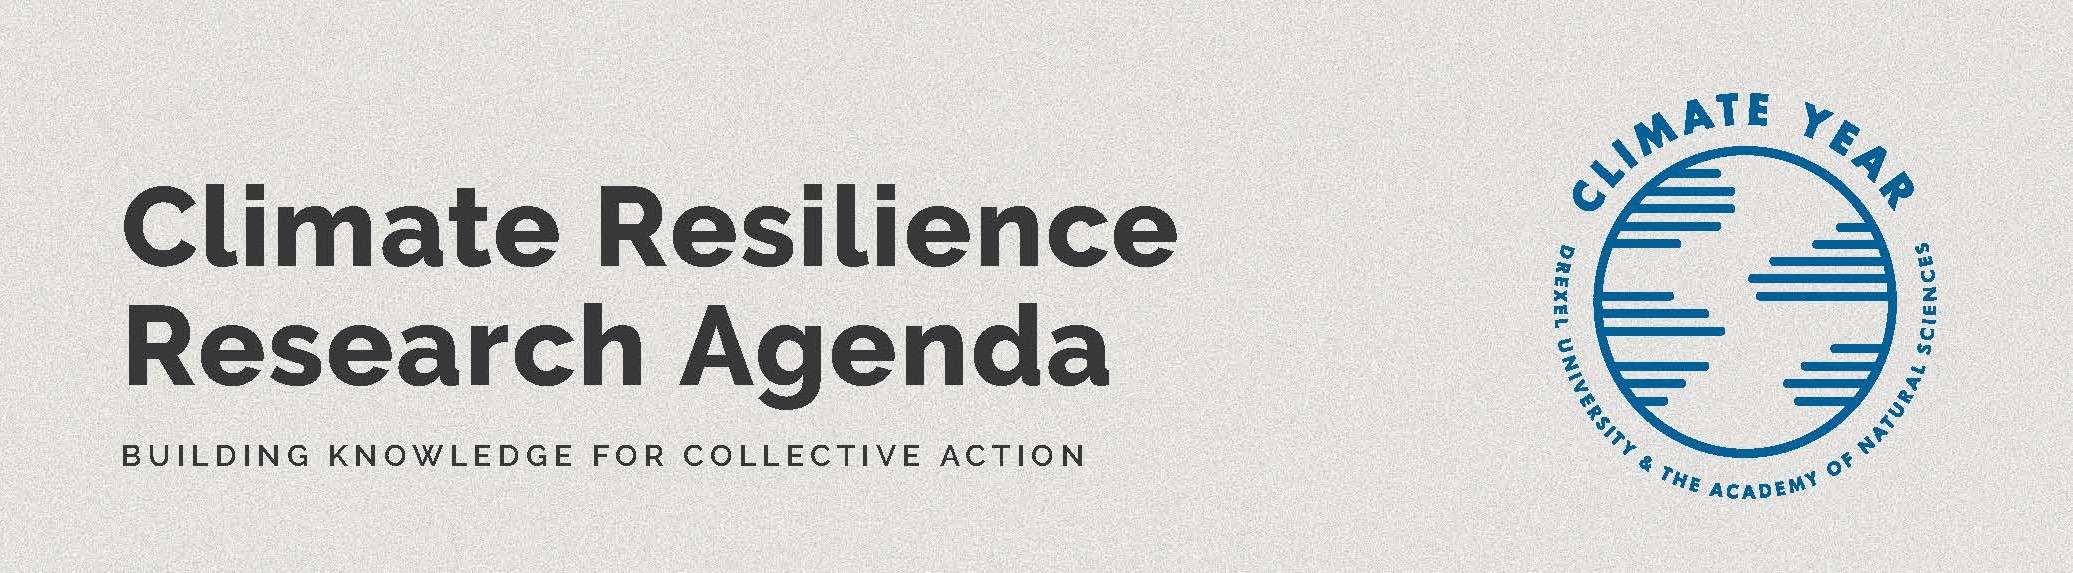 Climate Resilience Research Agenda